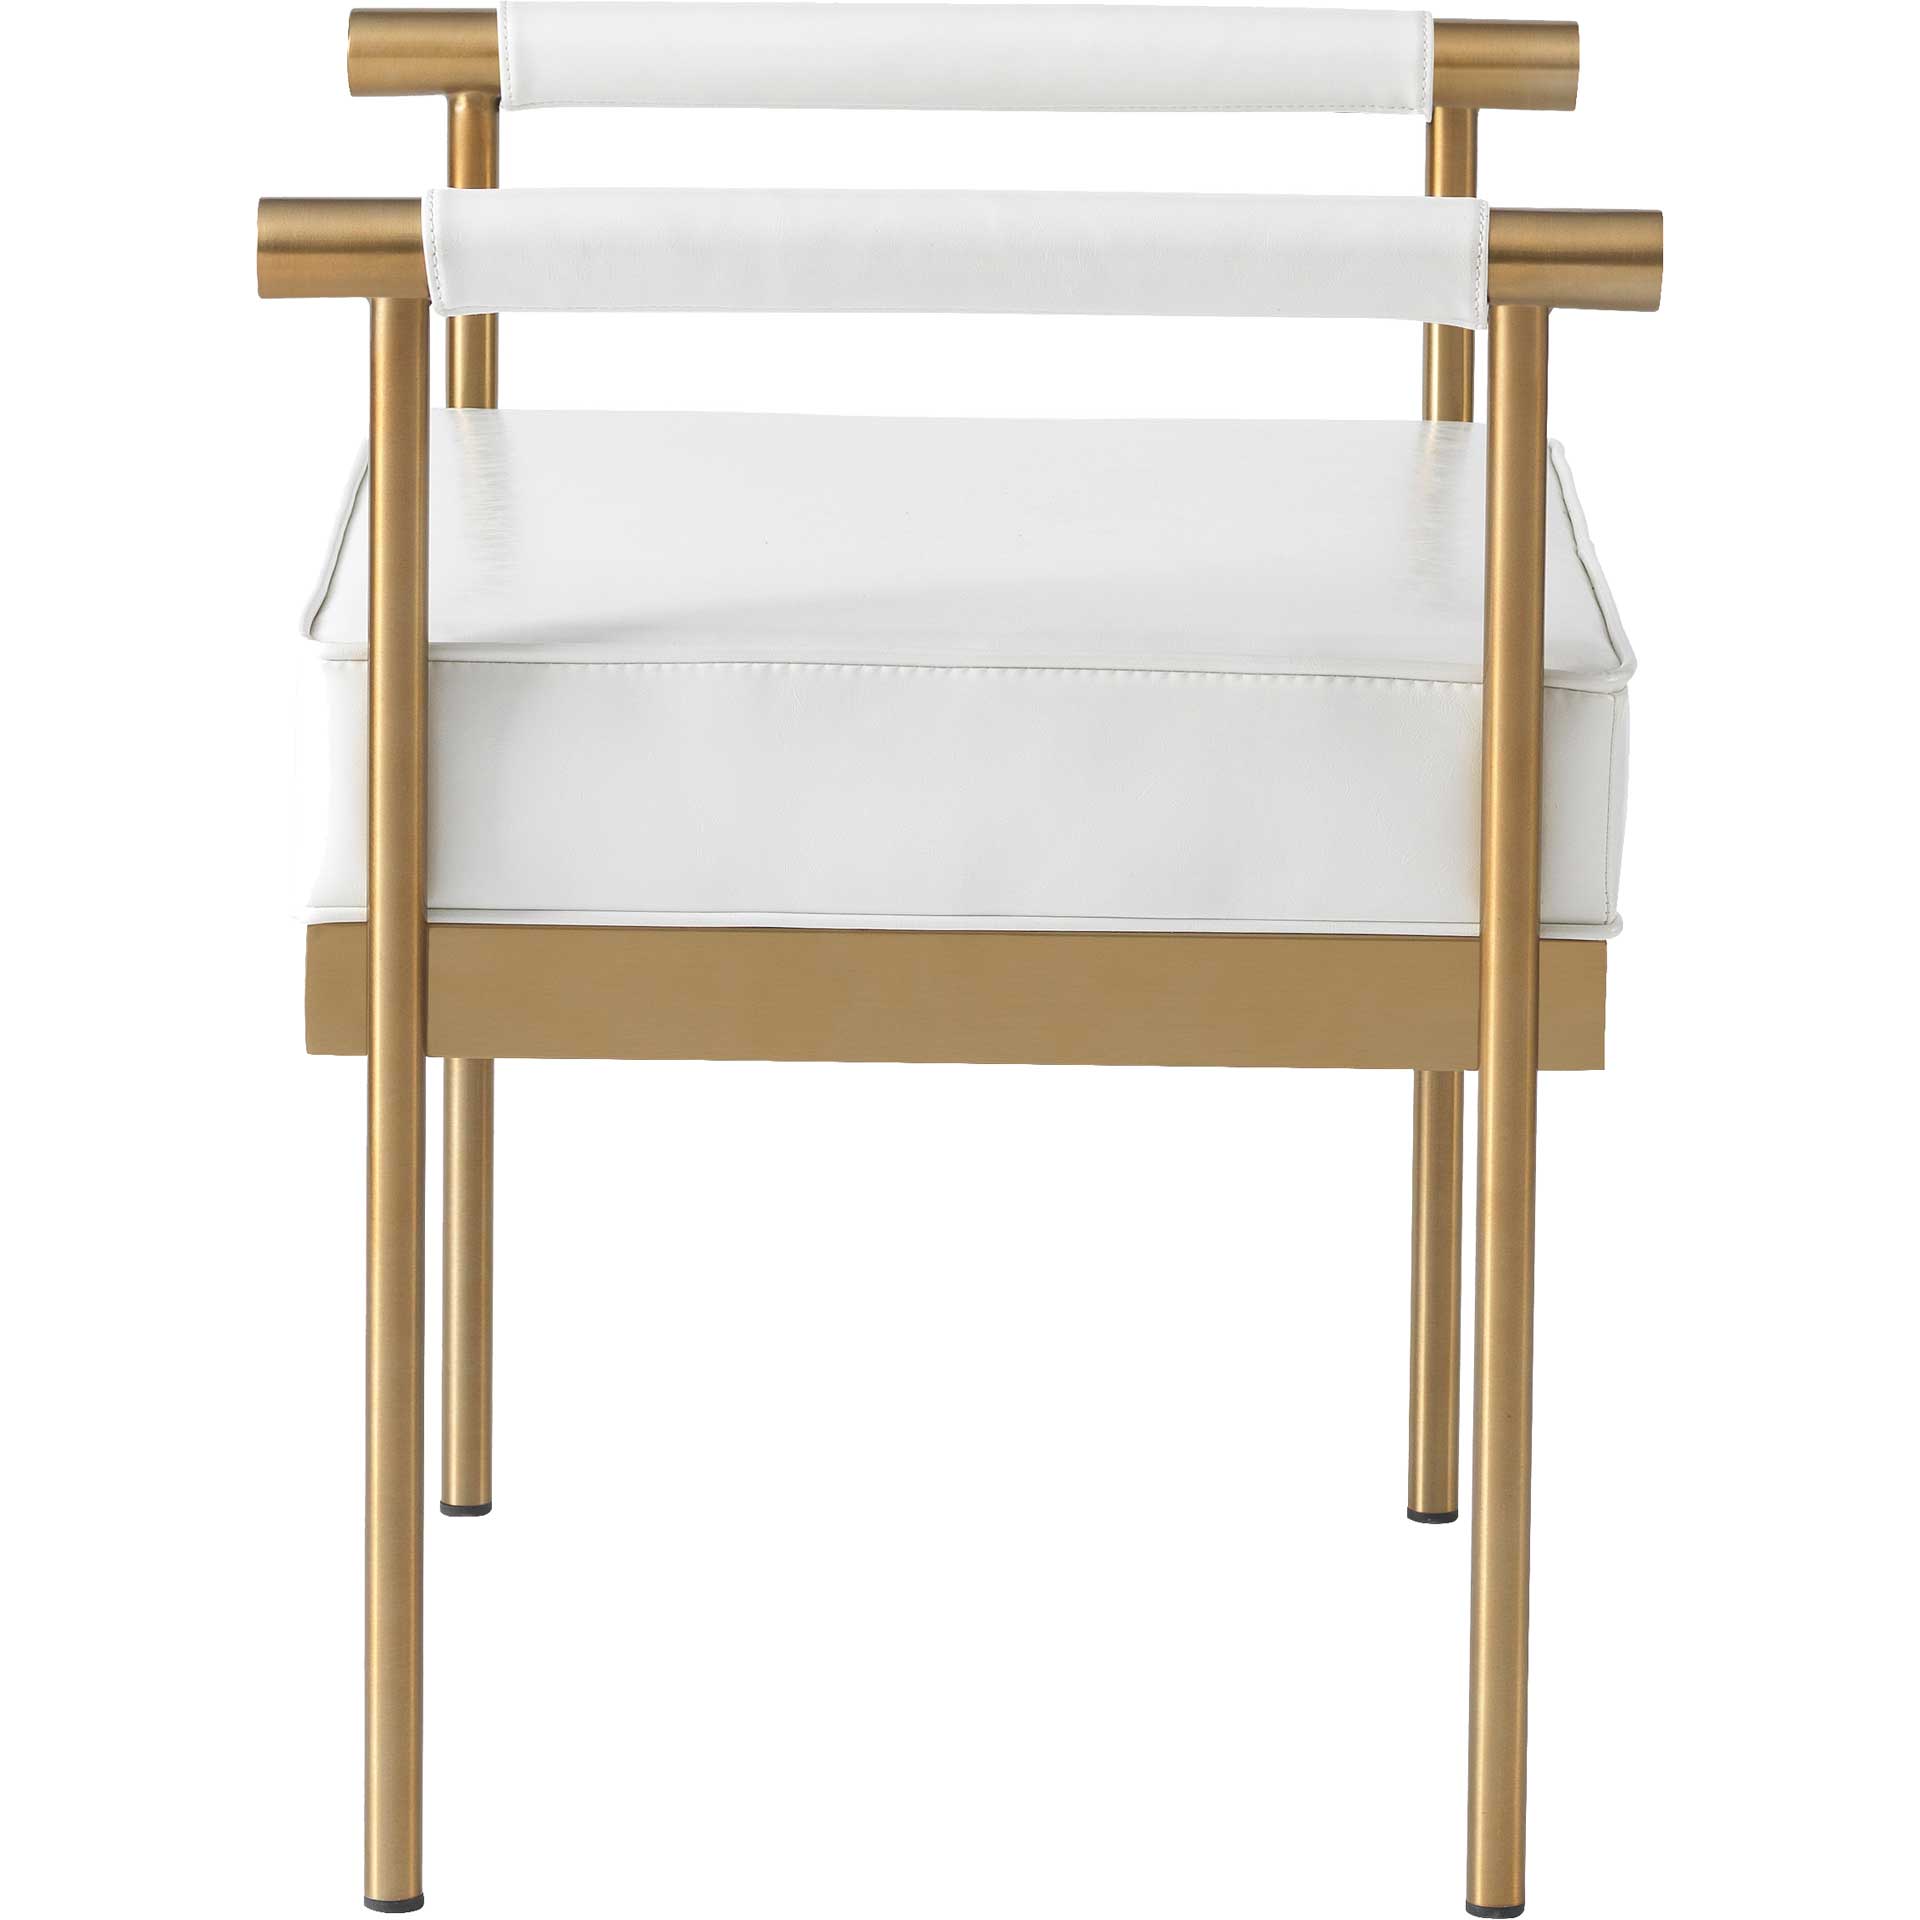 Dion Vegan Leather Bench White